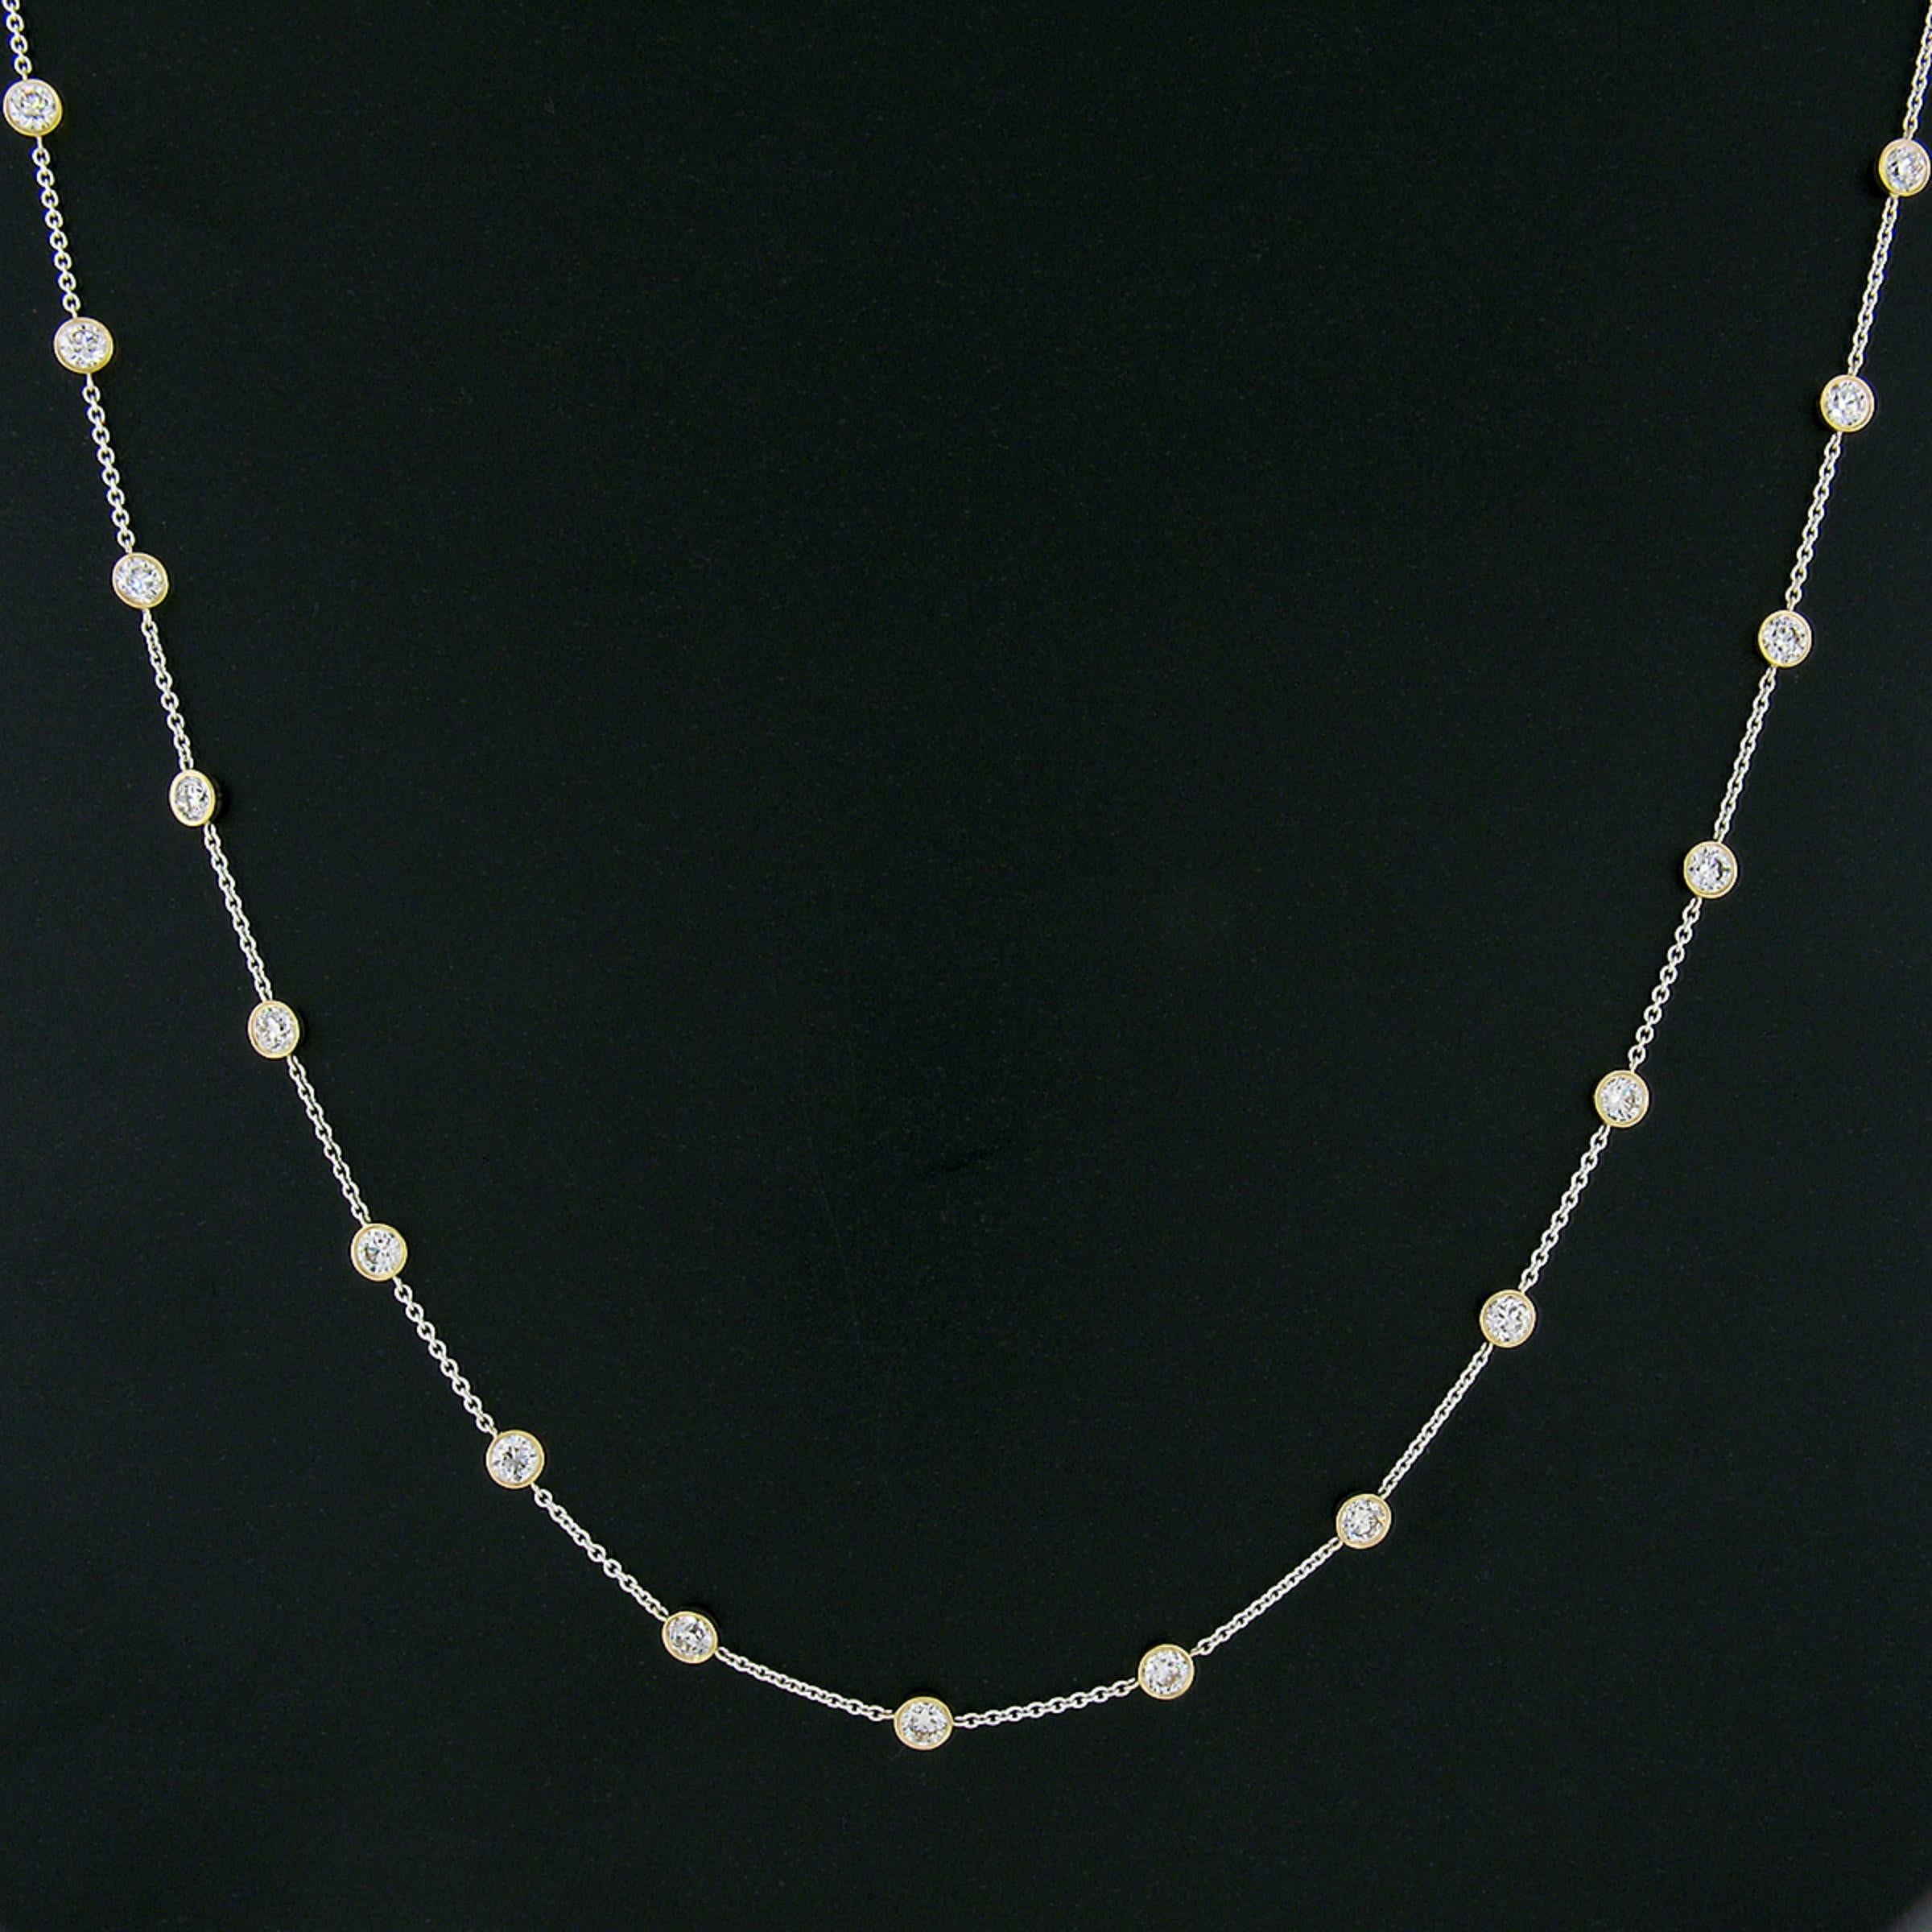 This gorgeous, custom made, diamond by the yard necklace is newly crafted from solid 18k white and yellow gold. It features a white gold cable link chain with 19, evenly spaced, yellow gold bezel stations that carry the stunning diamonds throughout